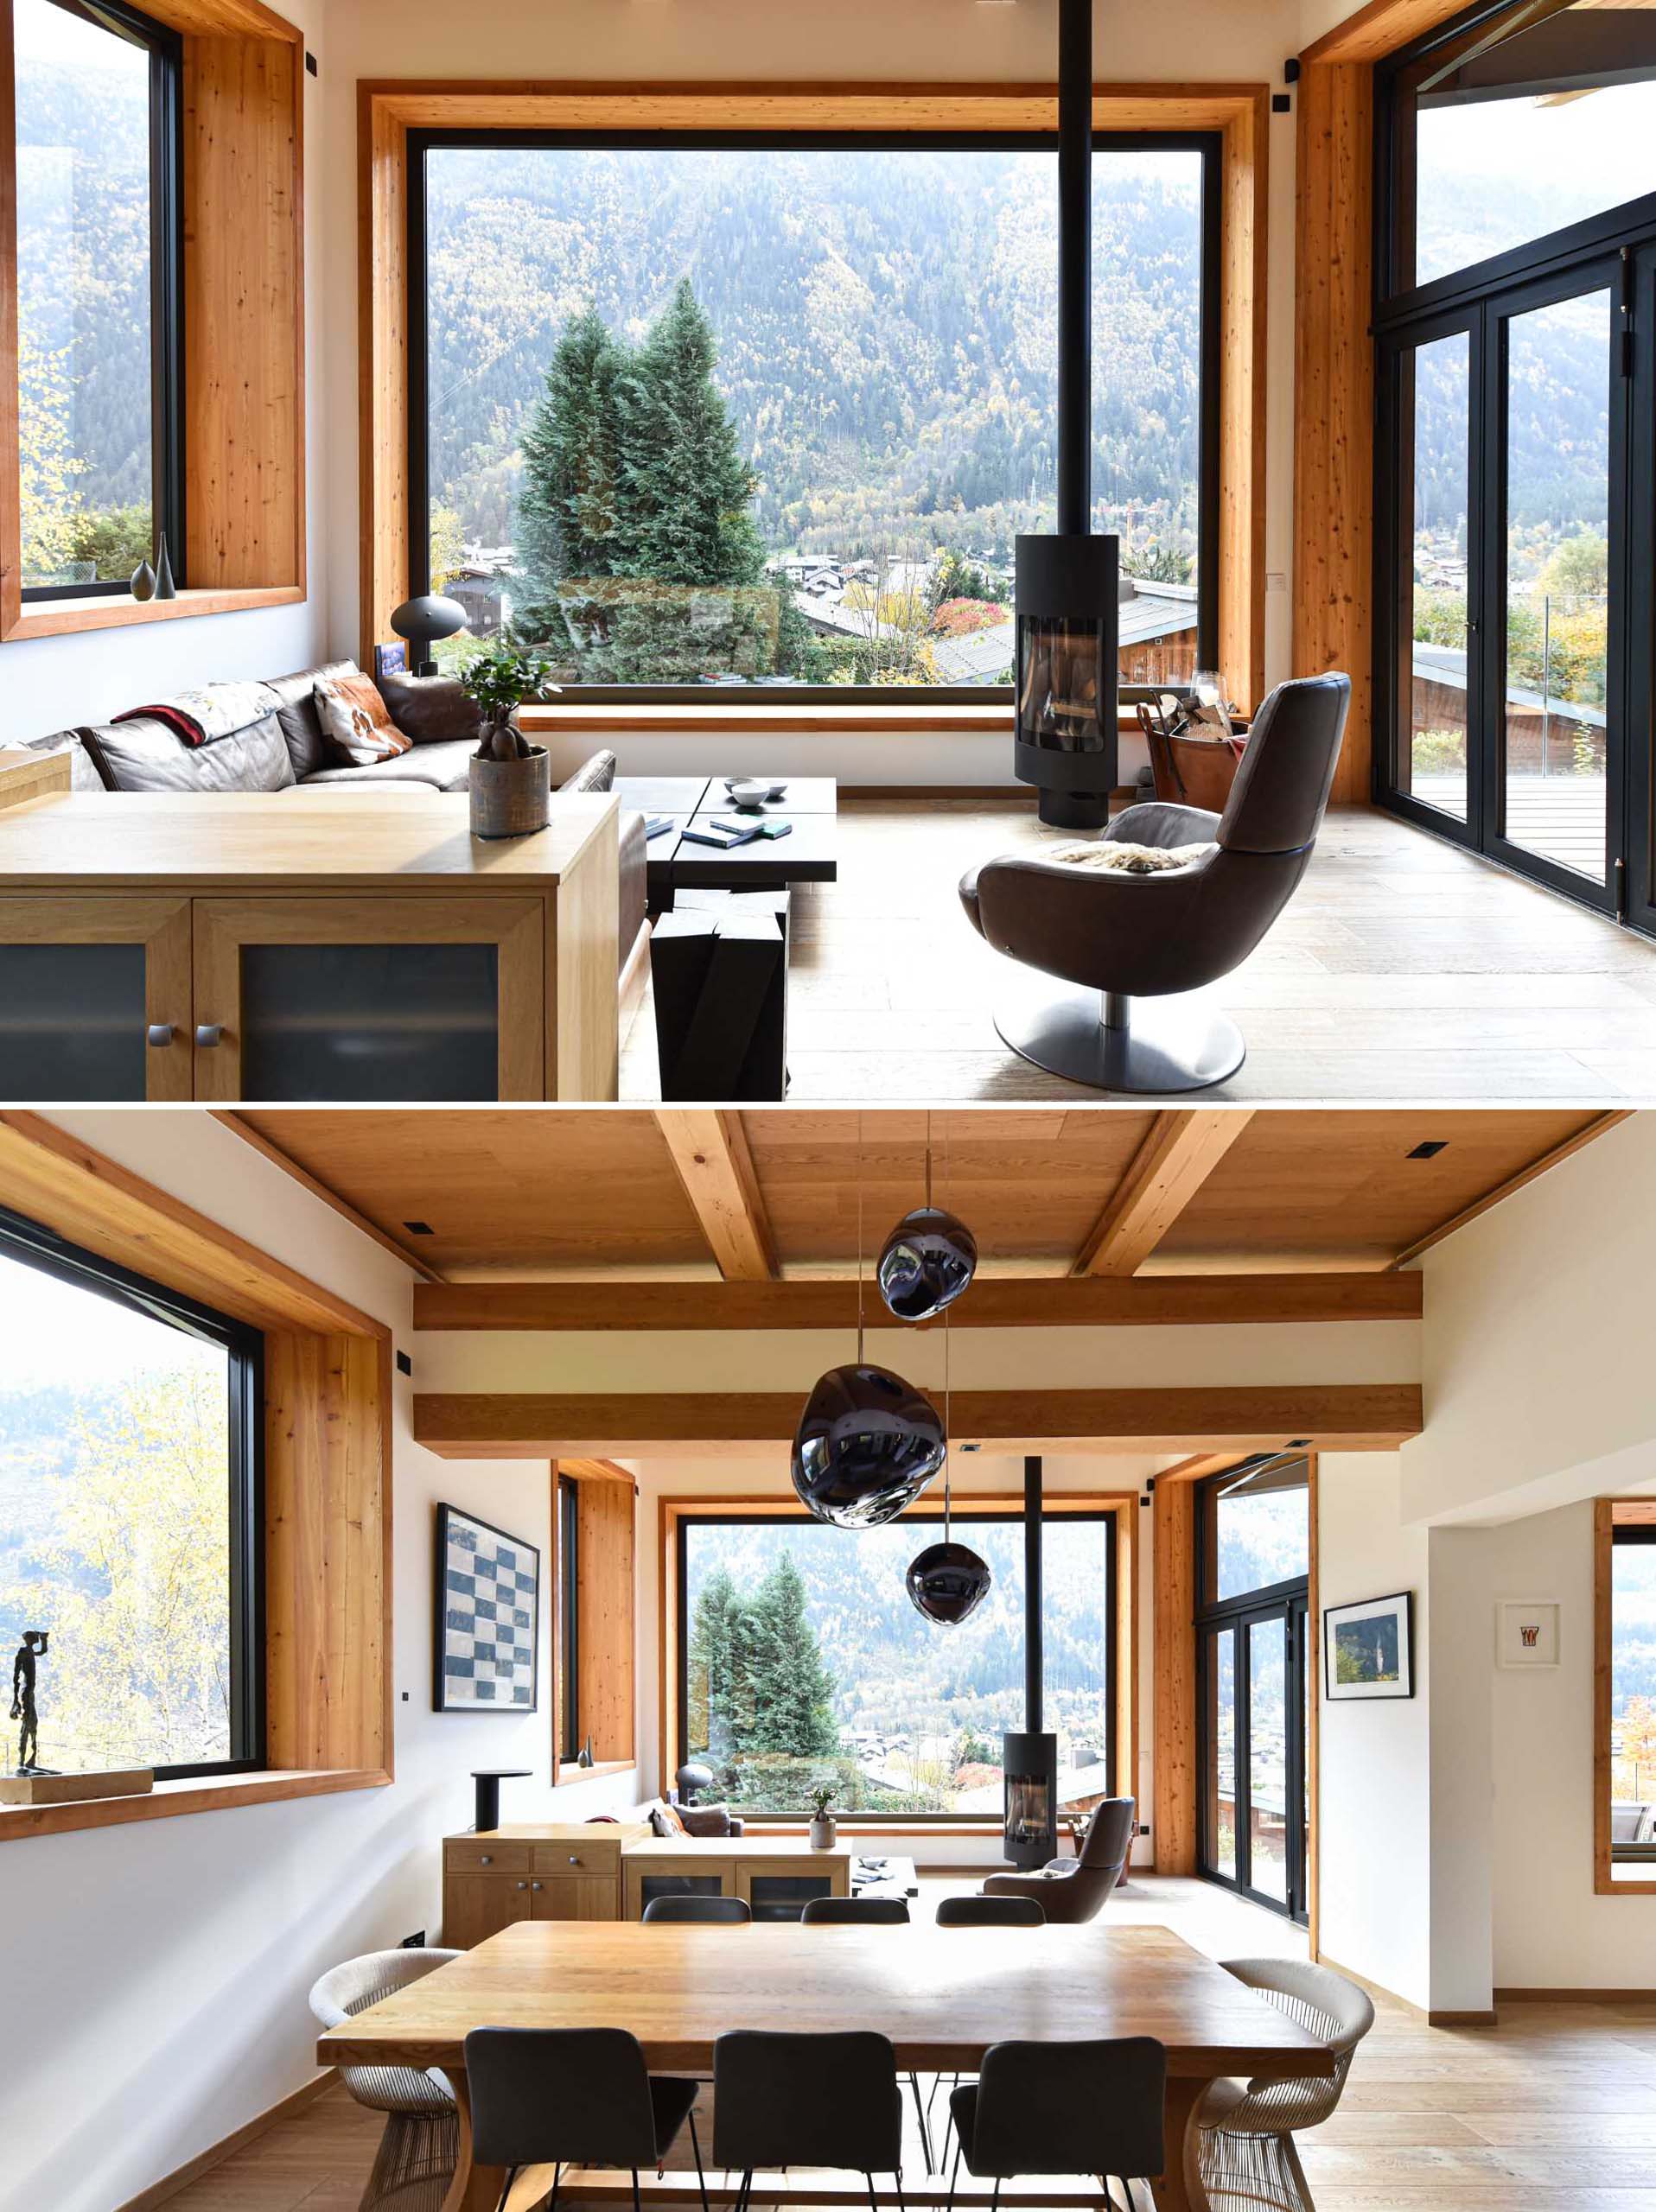 A living room with a fireplace and a large picture window that perfectly frames the view of the neighbouring houses, as well as the trees and nearby mountain.